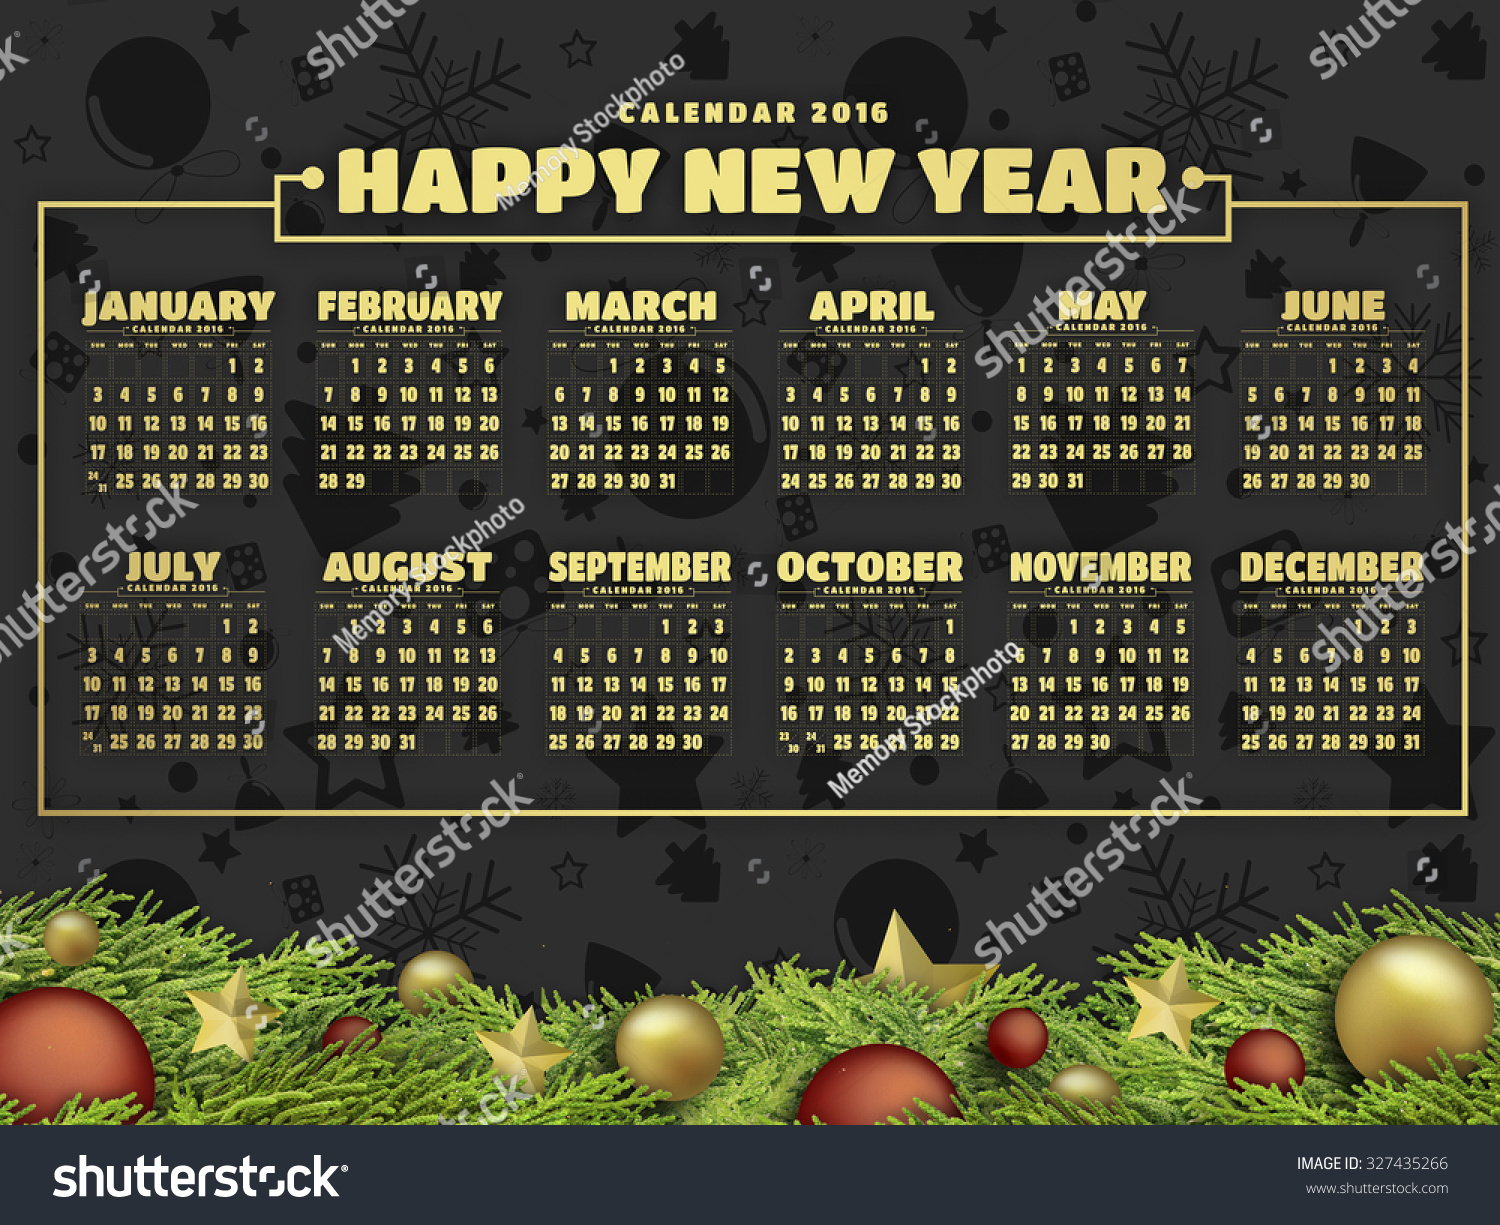 Calendar 2016 And Happy New Year Stock Photo 327435266 : Shutterstock